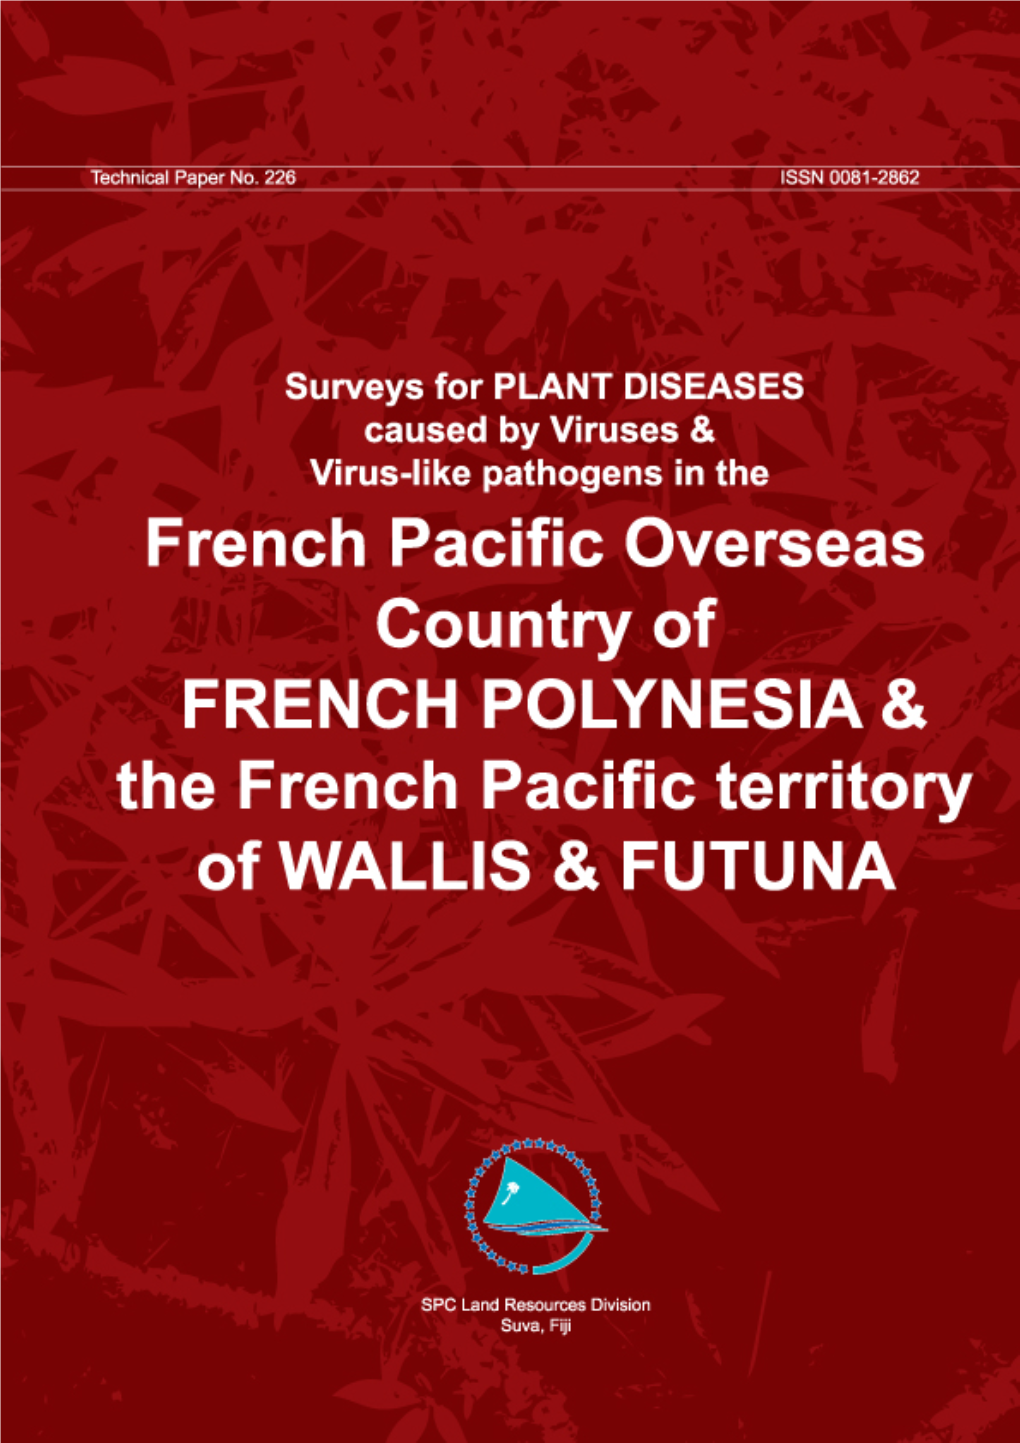 PLANT DISEASES Caused by Viruses & Virus-Like Pathogens in the French Pacific Overseas Country of FRENCH POLYNESIA & the French Pacific Territory of WALLIS & FUTUNA